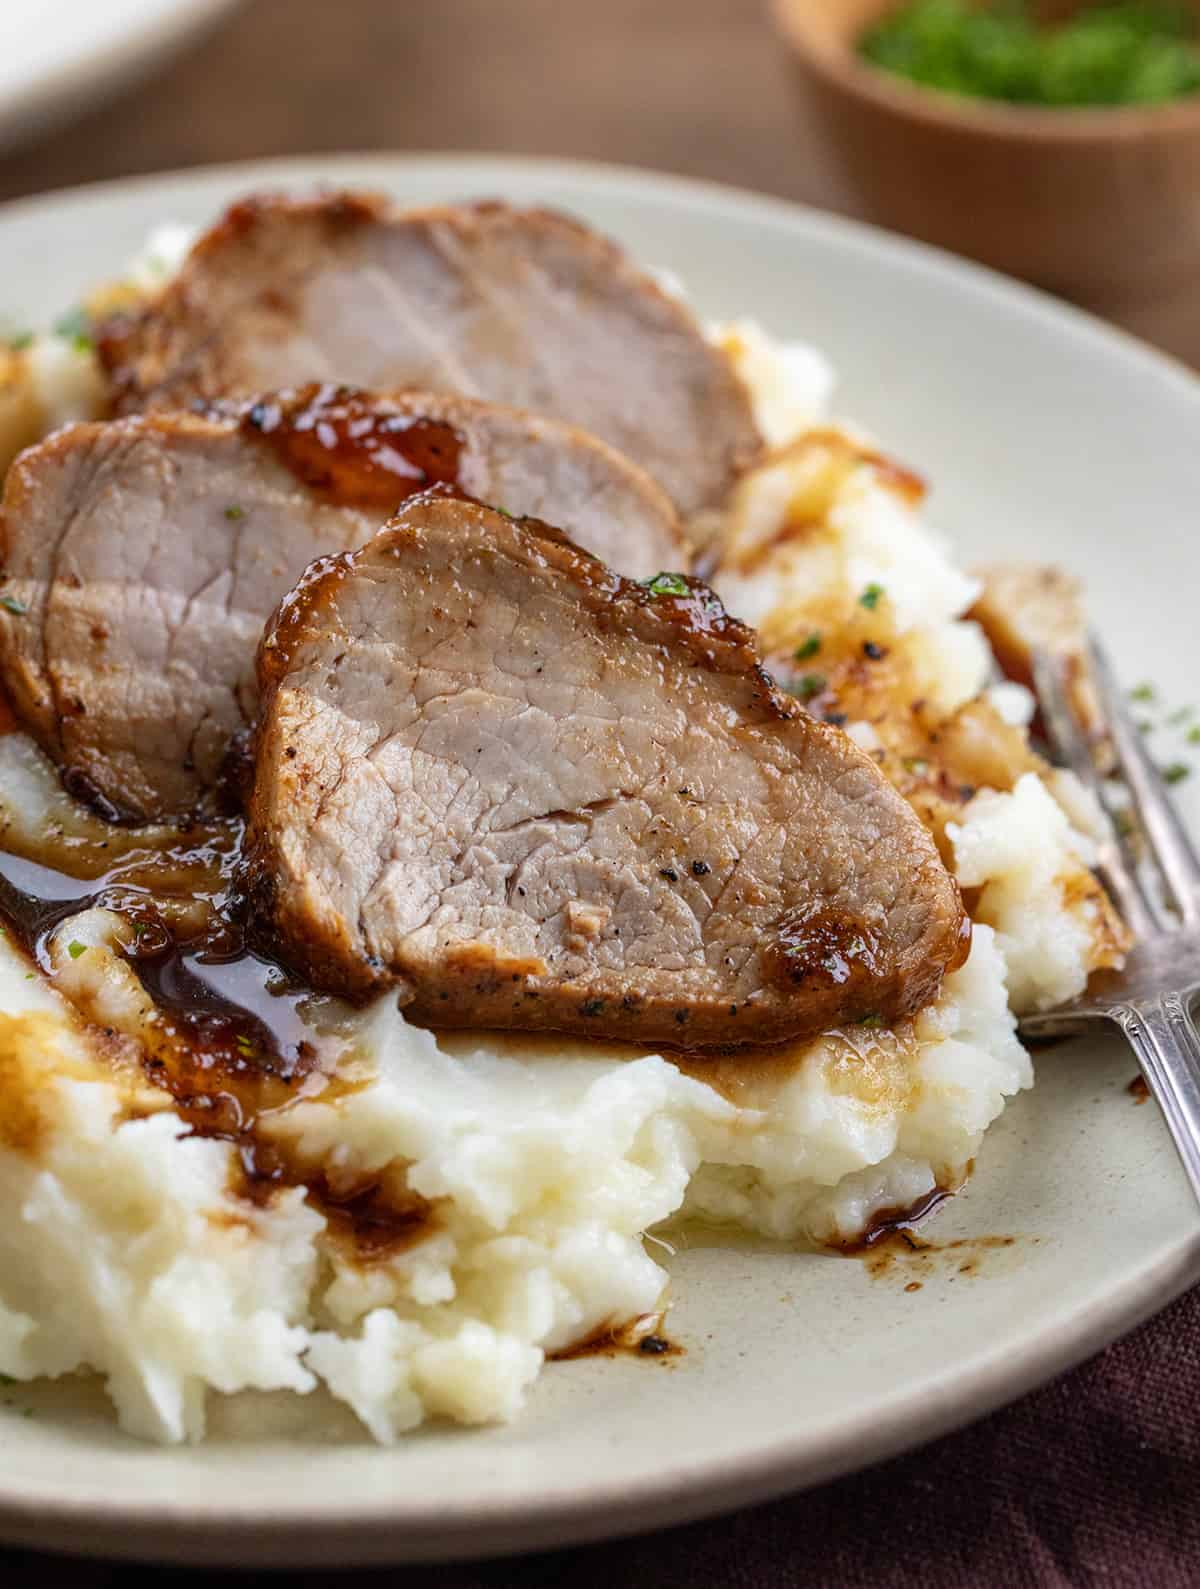 Close up of slices of Pork Tenderloin With Apricot Glaze on mashed potatoes.